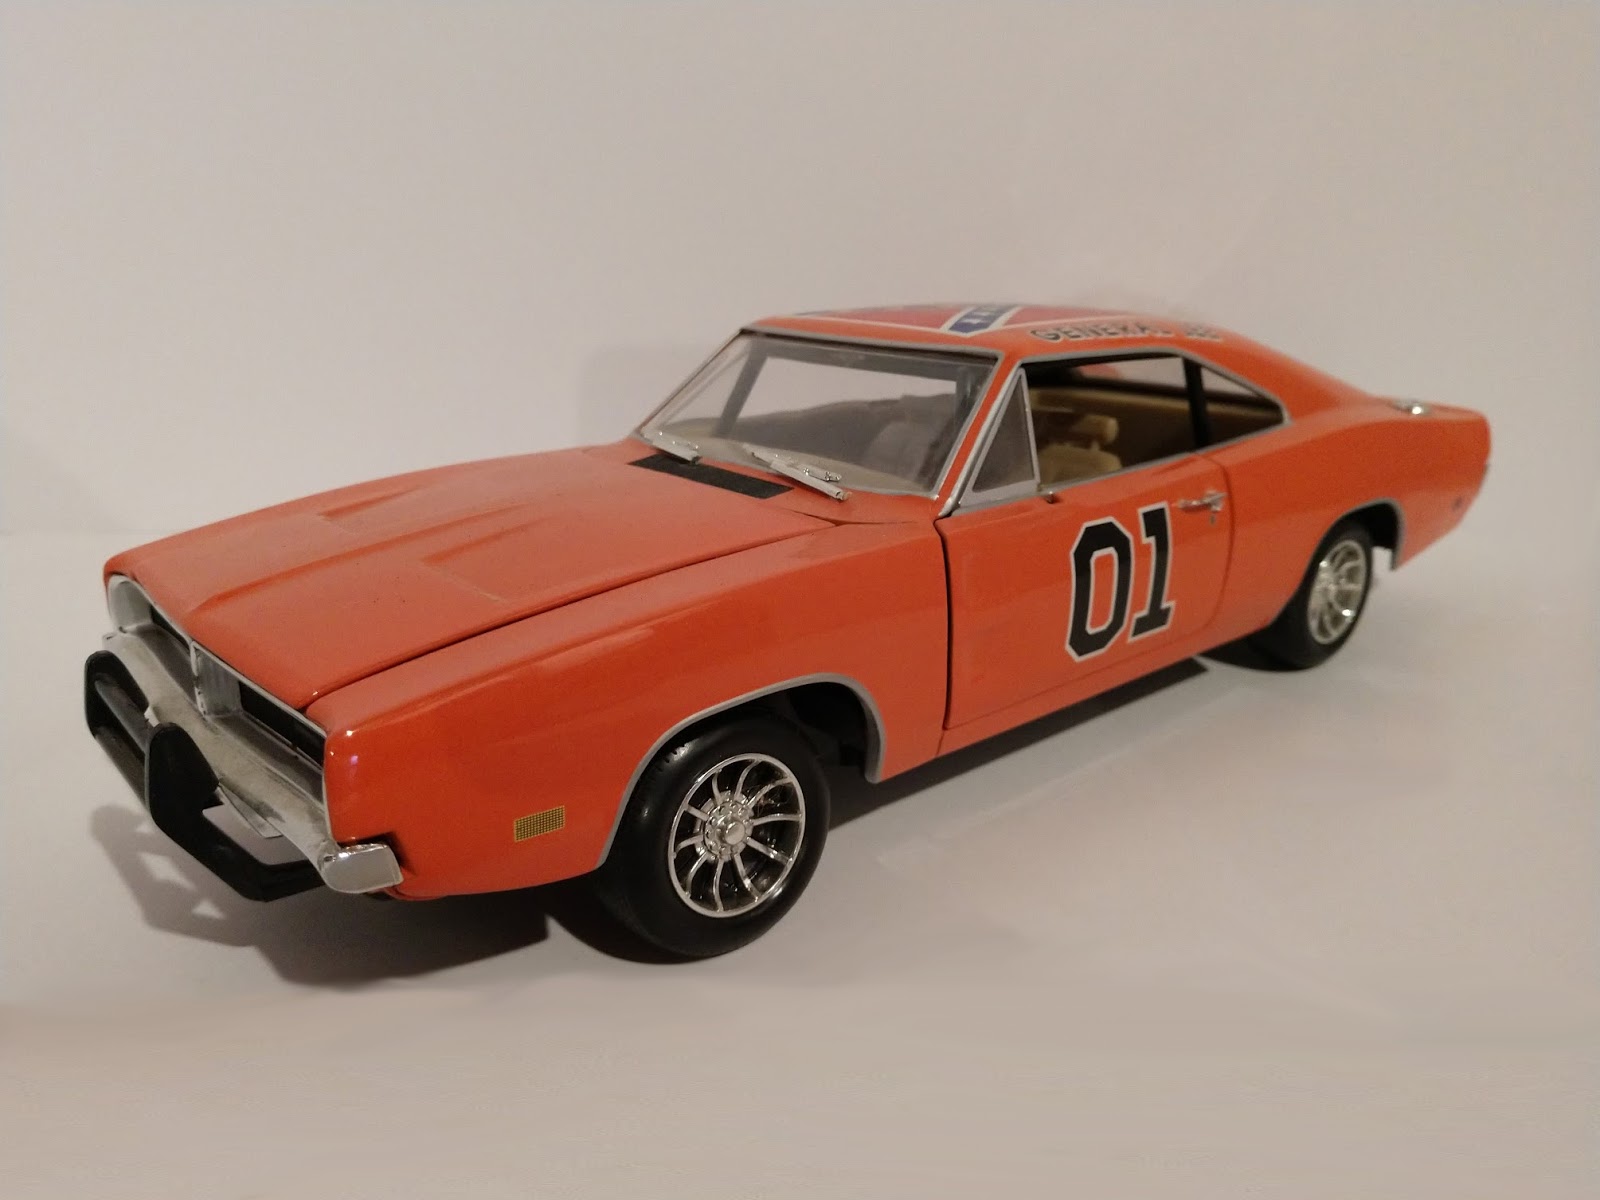 Dukes of Hazzard Collector: The Entire Line of Dukes of Hazzard 1/18 Diecast  Cars - All 40 - Post 1 of 4: American Muscle